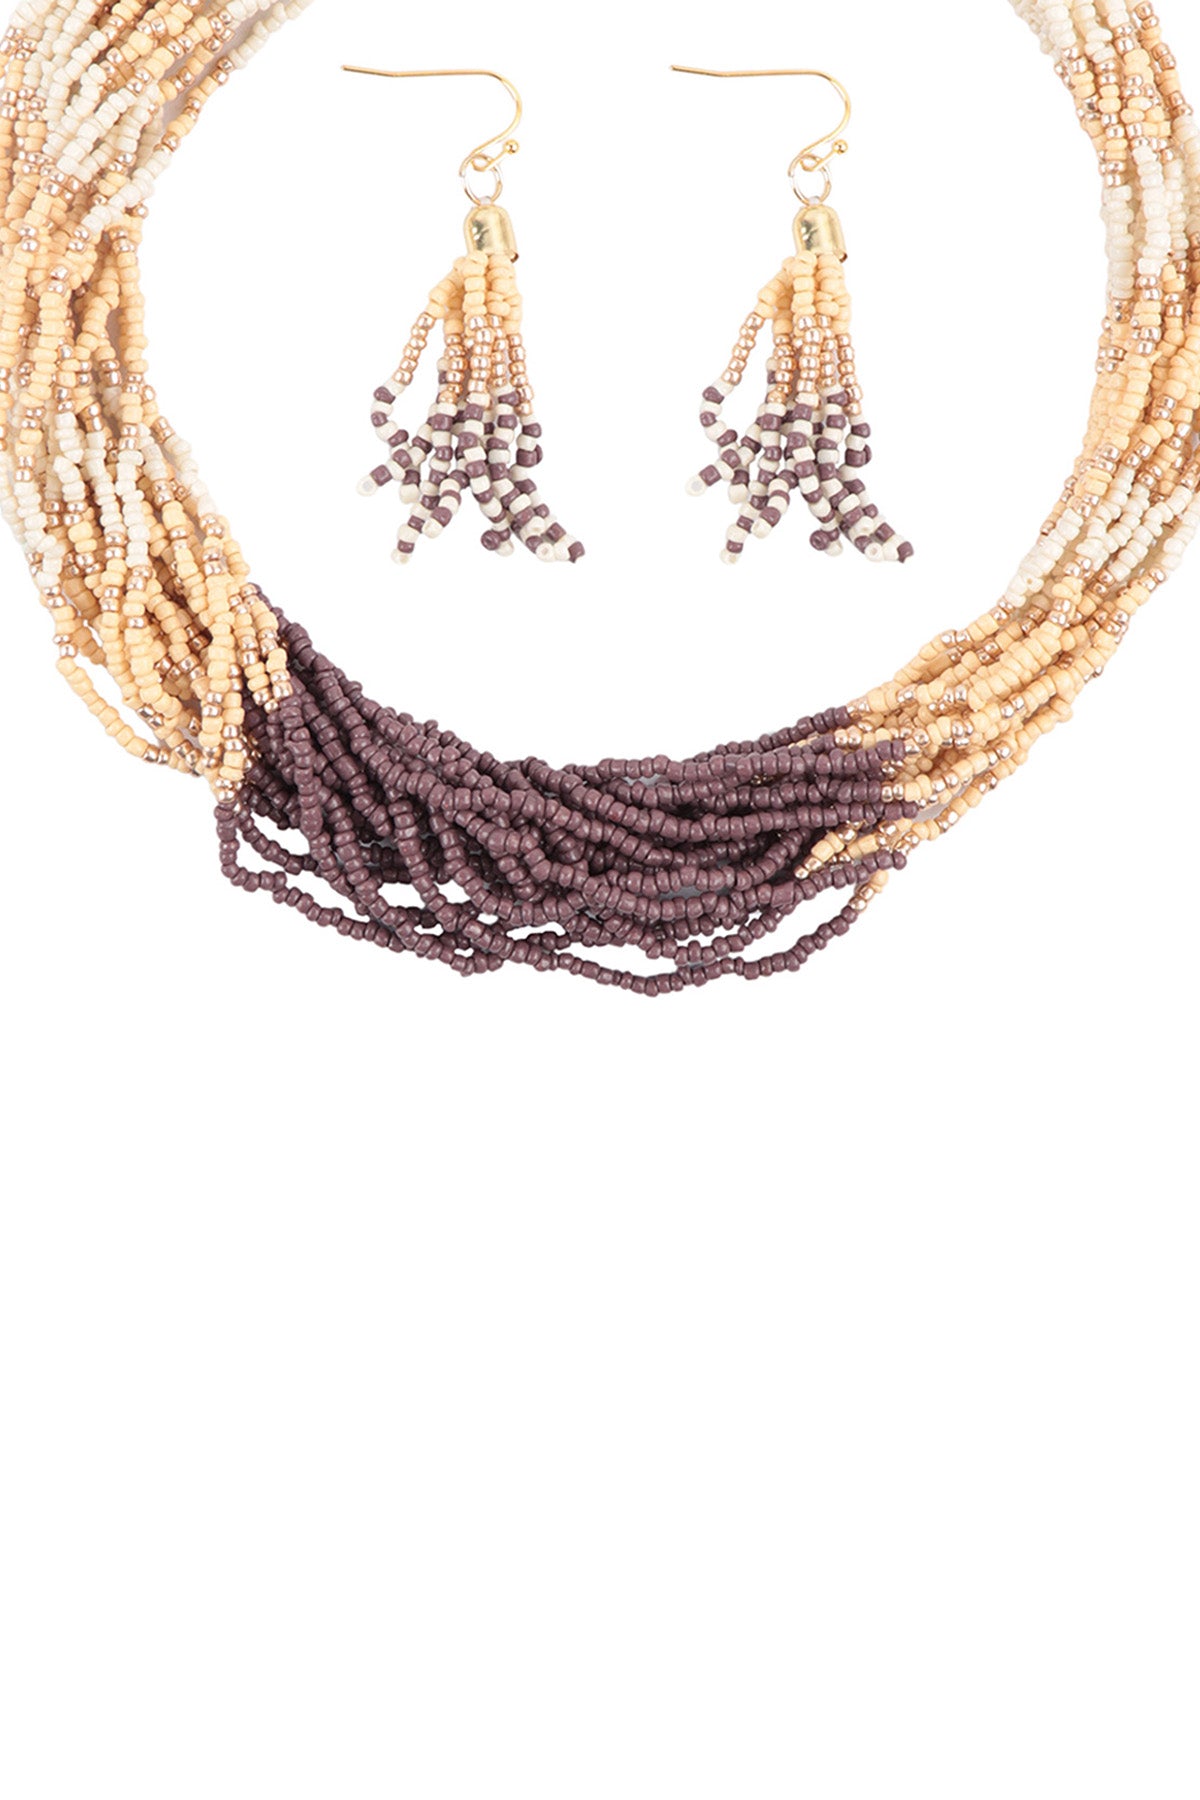 SEED BEAD MULTI LAYERED STATEMENT NECKLACE AND EARRING SET